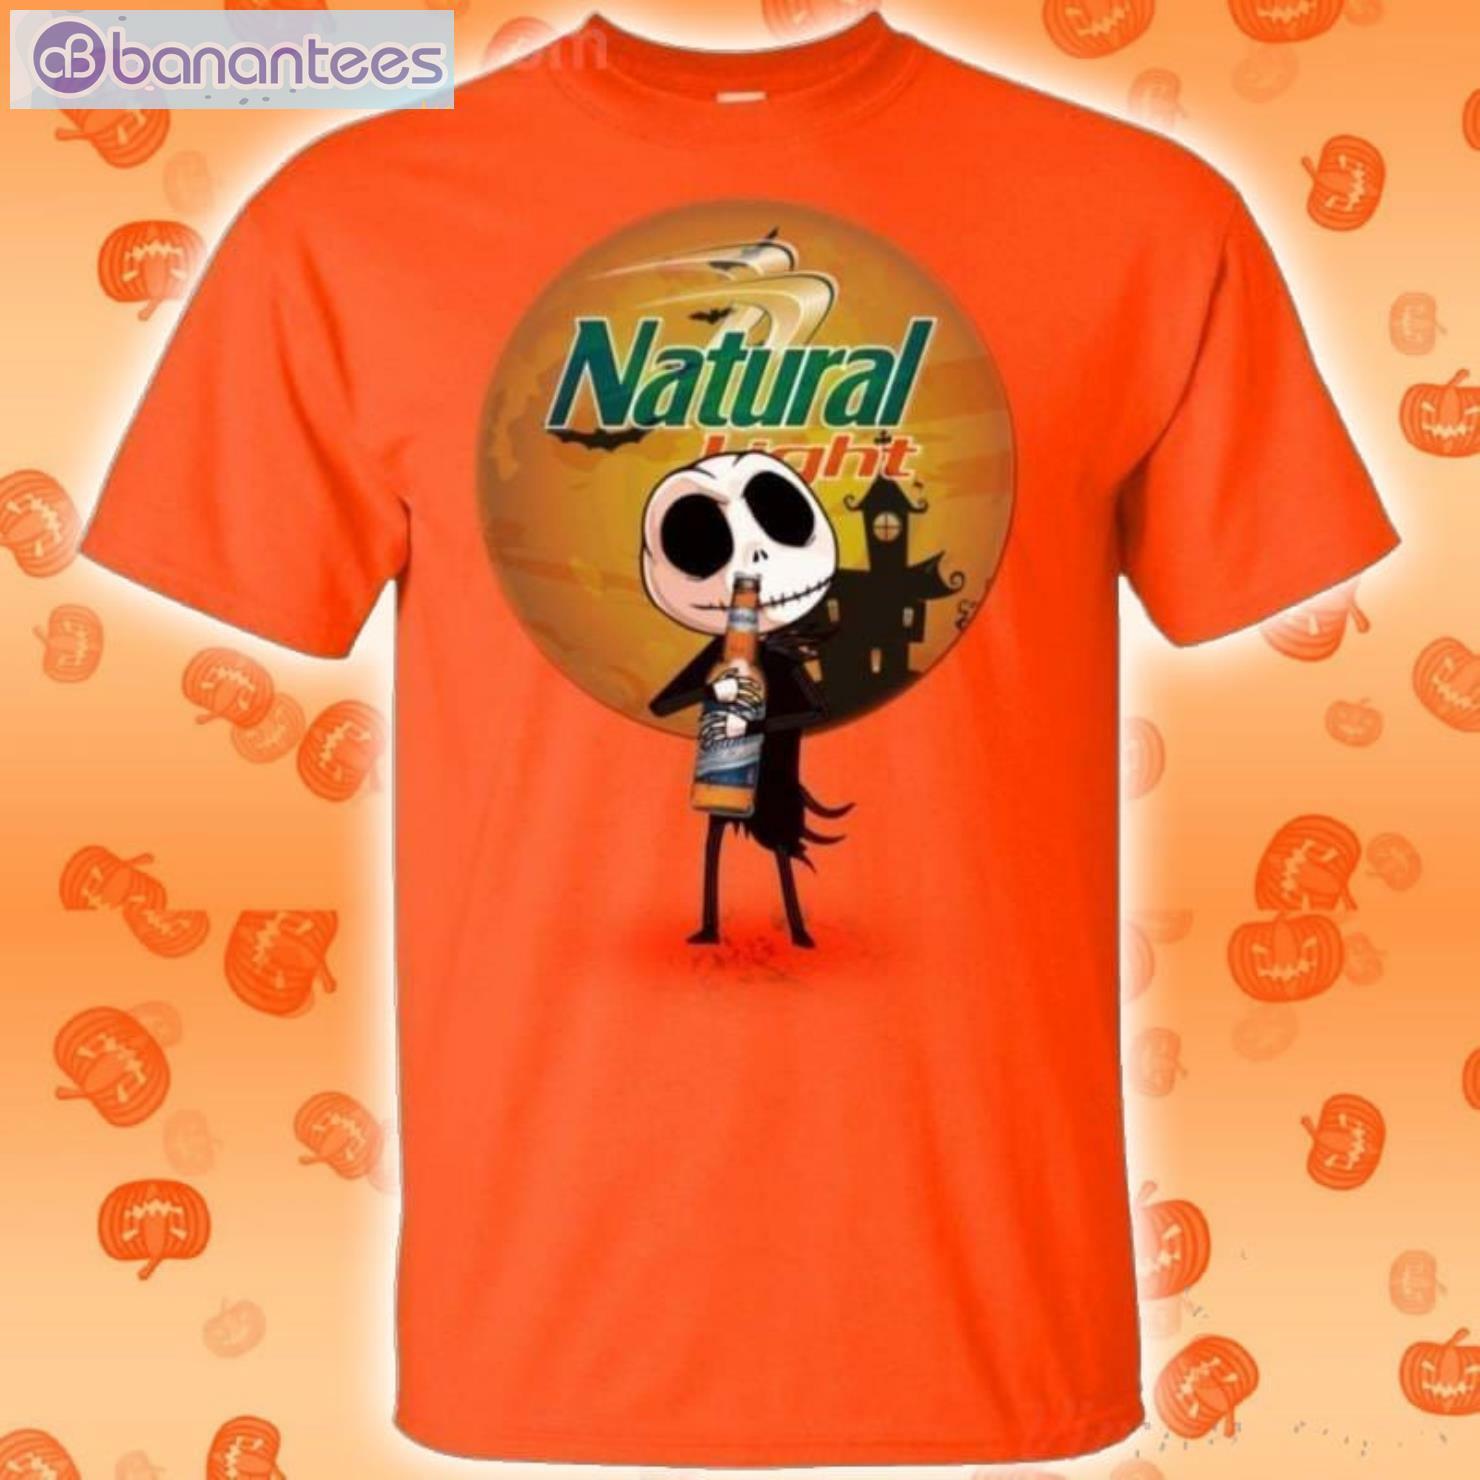 Jack Skellington Hold Natural Light Beer Halloween T-Shirt Product Photo 2 Product photo 2